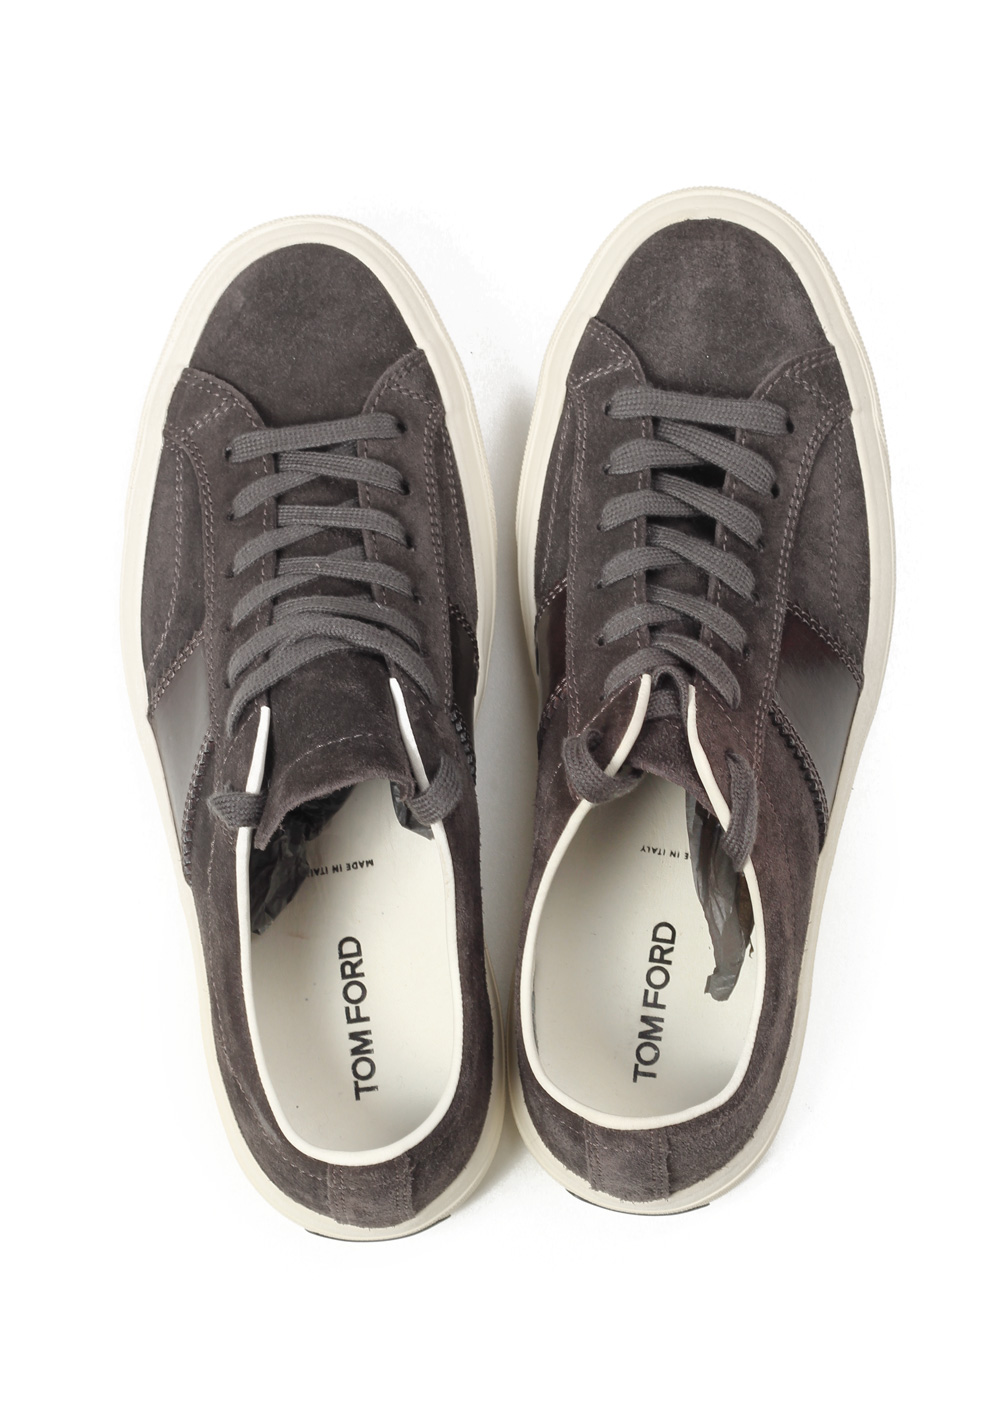 TOM FORD Cambridge Lace Up Dark Gray Suede Sneaker Shoes Size 7 UK / 8 U.S. | Costume Limité